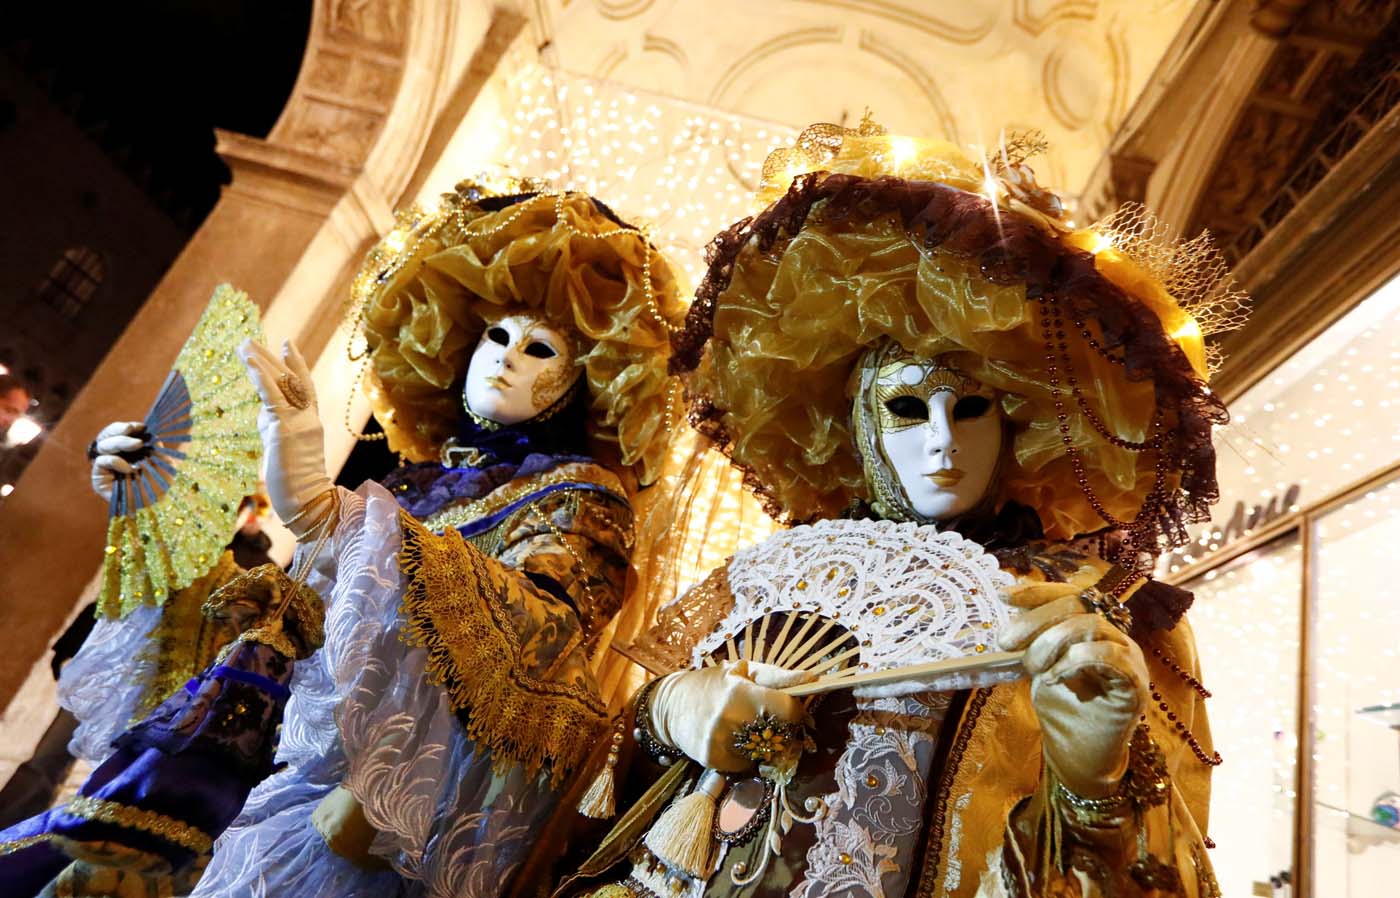 Masked revellers pose during the Venice Carnival in Venice, Italy February 18, 2017. REUTERS/Fabrizio Bensch TPX IMAGES OF THE DAY